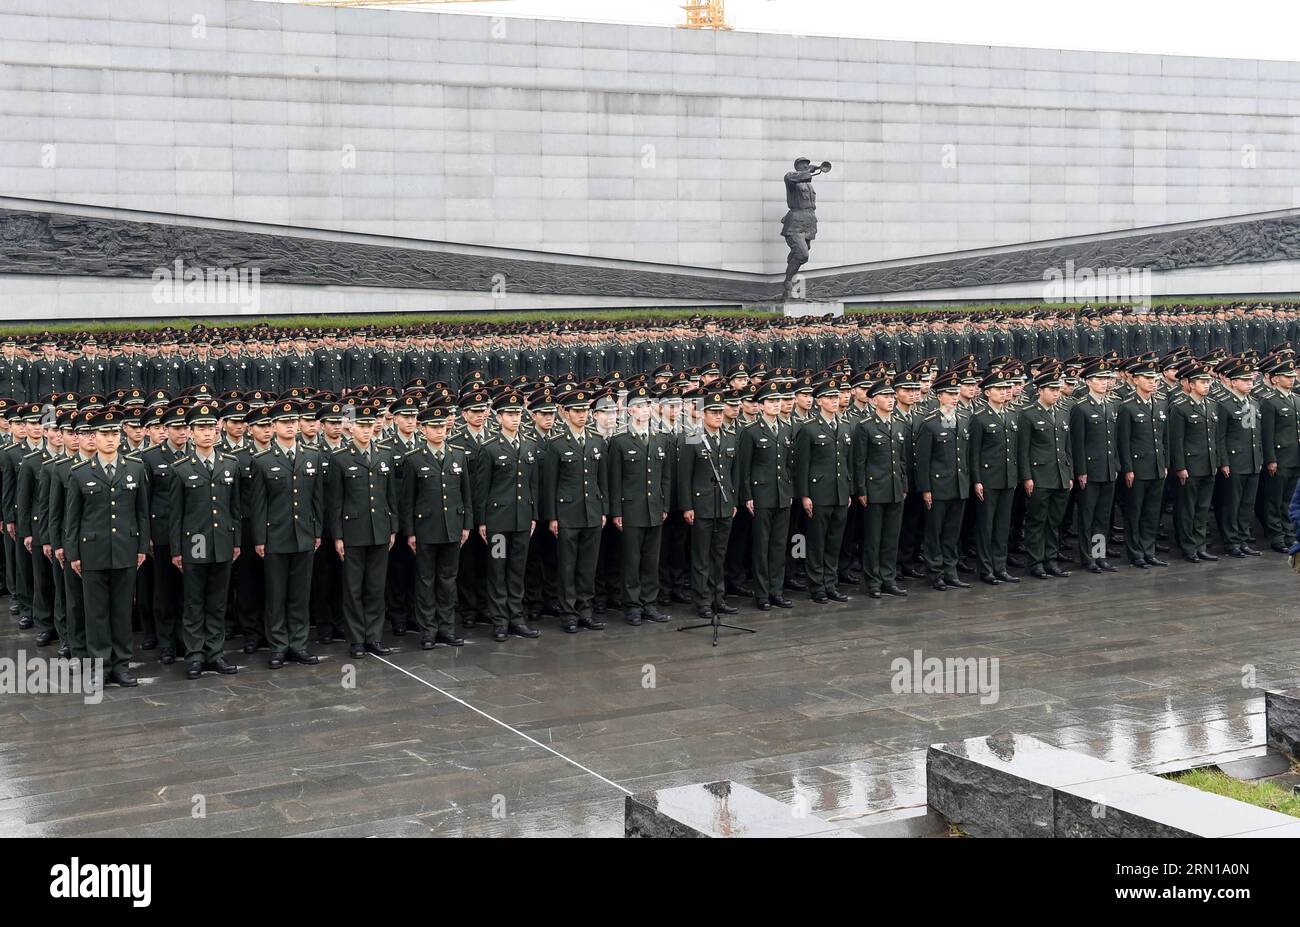 (141210) -- NANJING, Dec. 10, 2014 -- Soldiers of the People s Liberation Army (PLA) participate a memorial ceremony at the Memorial Hall of the Victims in Nanjing Massacre by Japanese Invaders, in Nanjing, Dec. 10, 2014. ) (mp) CHINA-NANJING-MASSACRE-MEMORIAL CEREMONY(CN) SunxCan PUBLICATIONxNOTxINxCHN   Nanjing DEC 10 2014 Soldiers of The Celebrities S Liberation Army PLA participate a Memorial Ceremony AT The Memorial Hall of The Victims in Nanjing Massacre by Japanese Invaders in Nanjing DEC 10 2014 MP China Nanjing Massacre Memorial Ceremony CN  PUBLICATIONxNOTxINxCHN Stock Photo